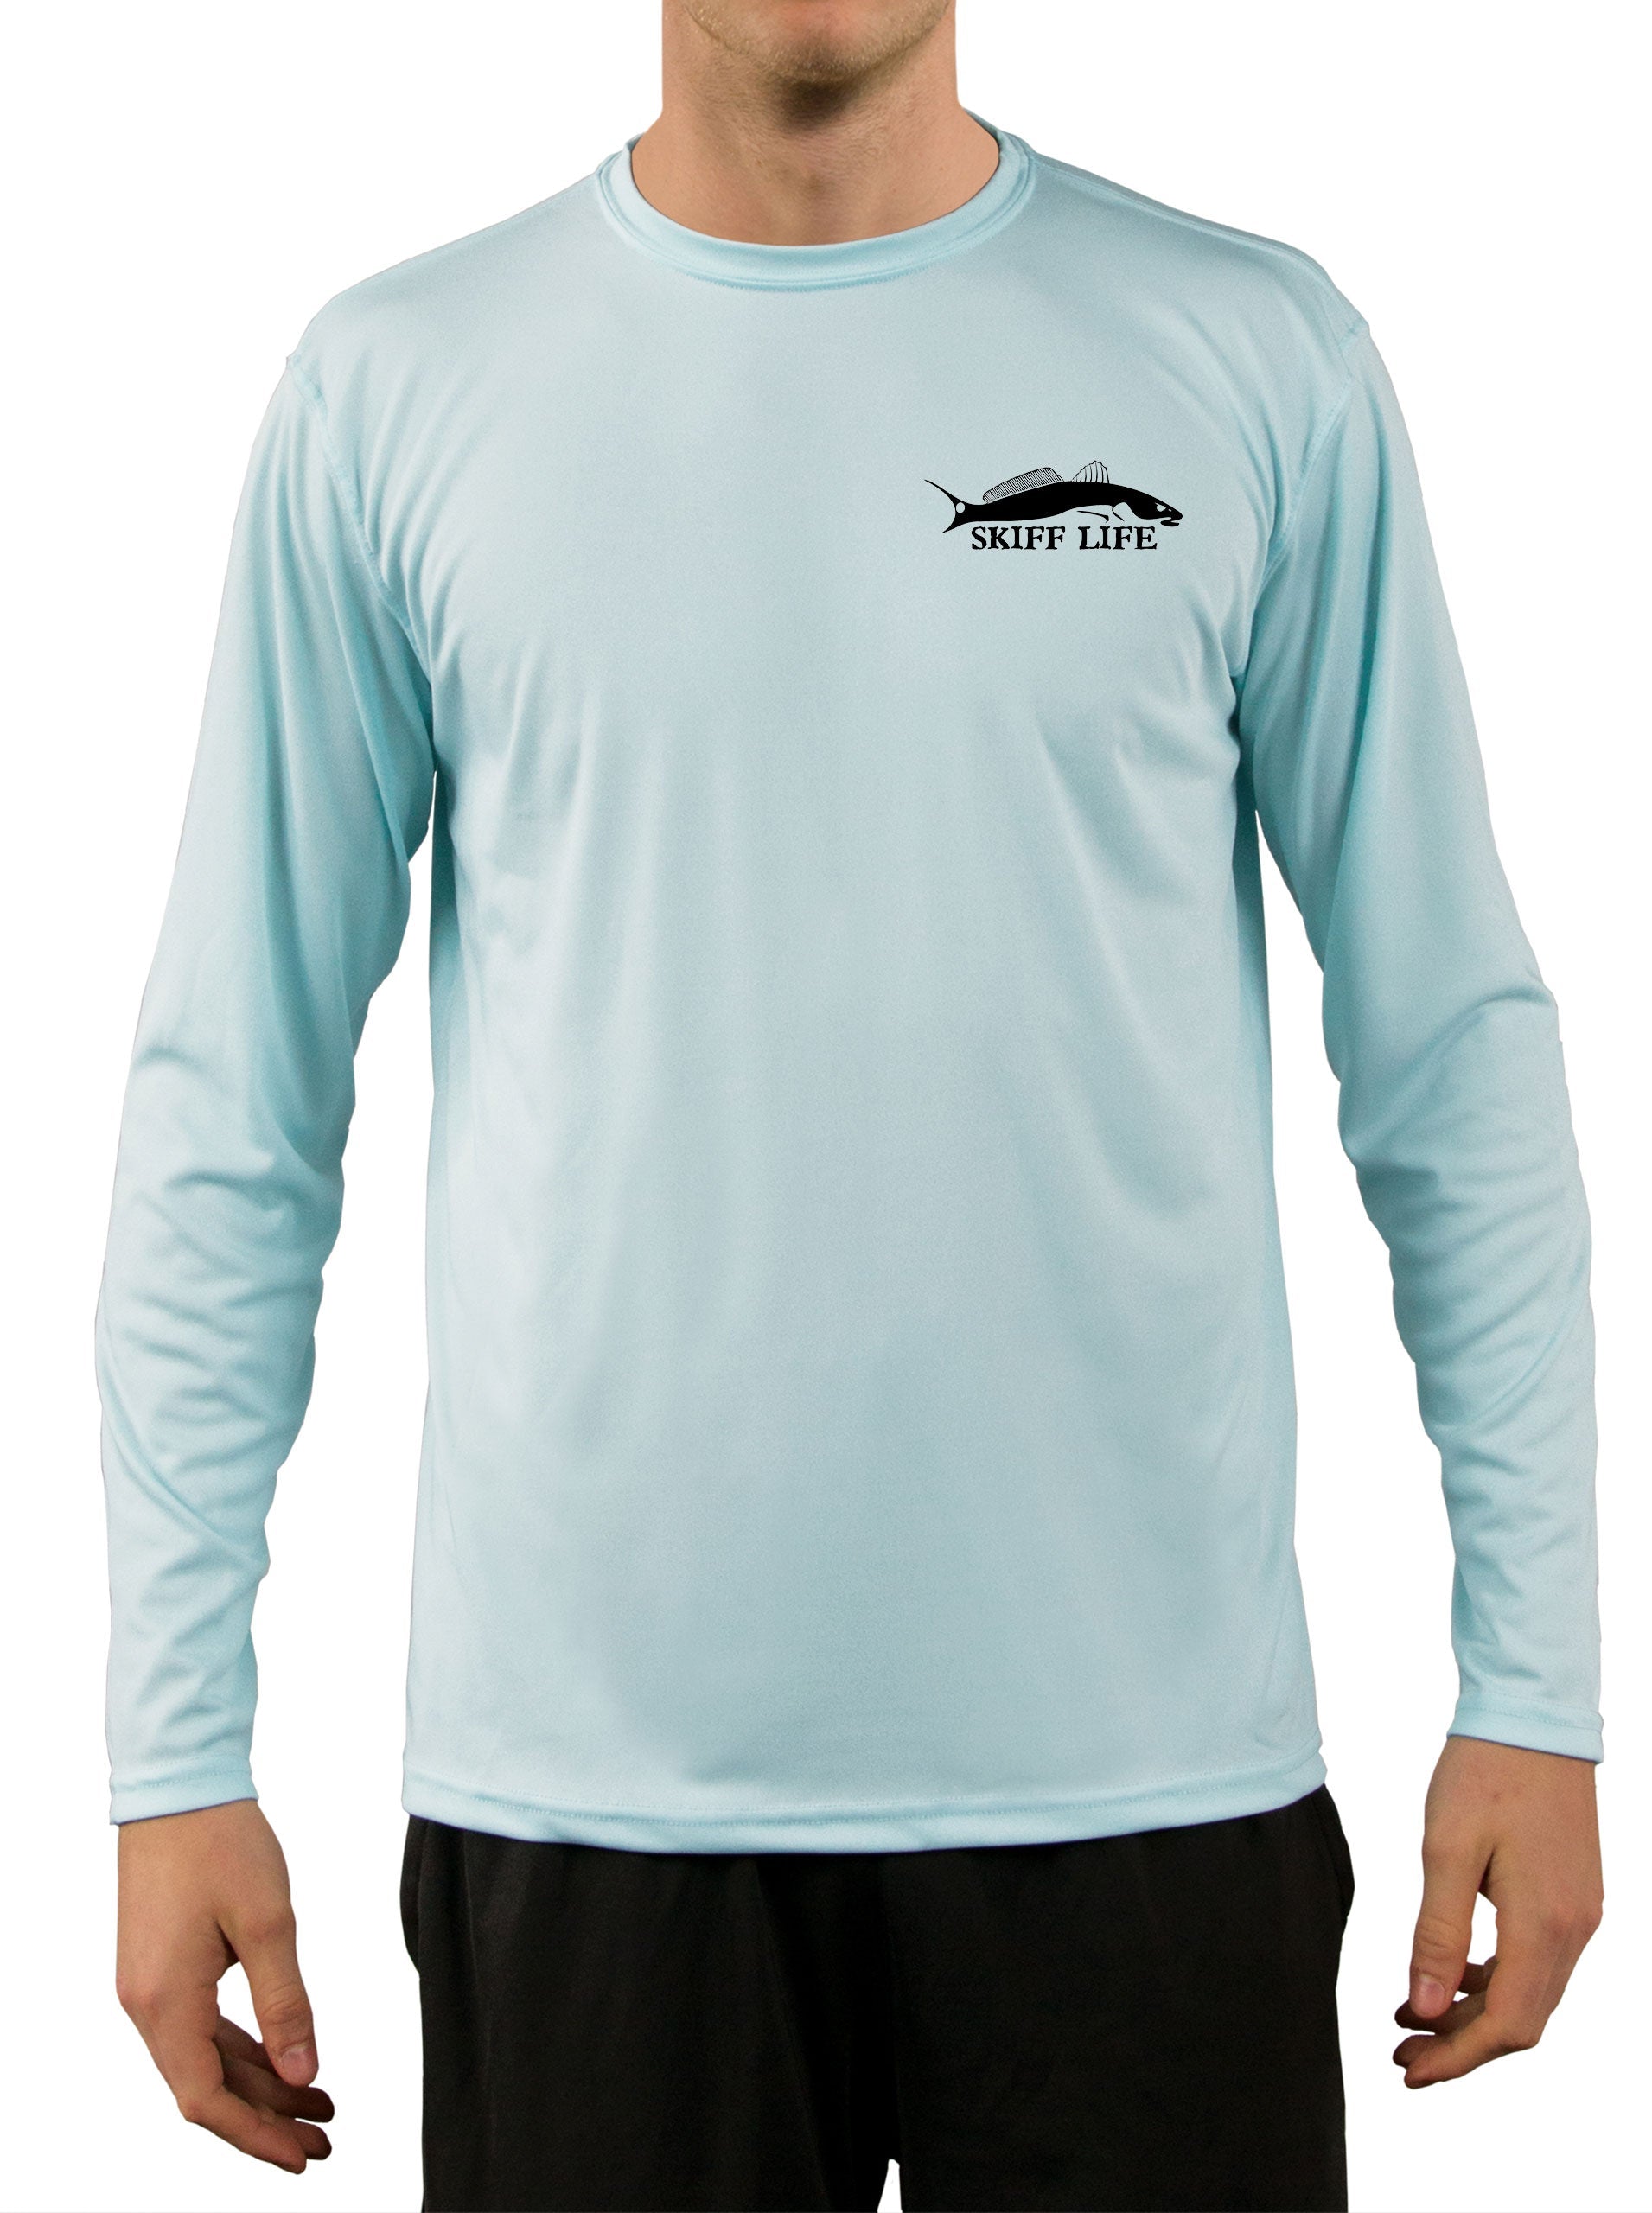 Redfish Fishing Shirts for Men Red Drum Channel Bass - UV Protected +50 Sun Protection with Moisture Wicking Technology 3XL / Pearl Gray